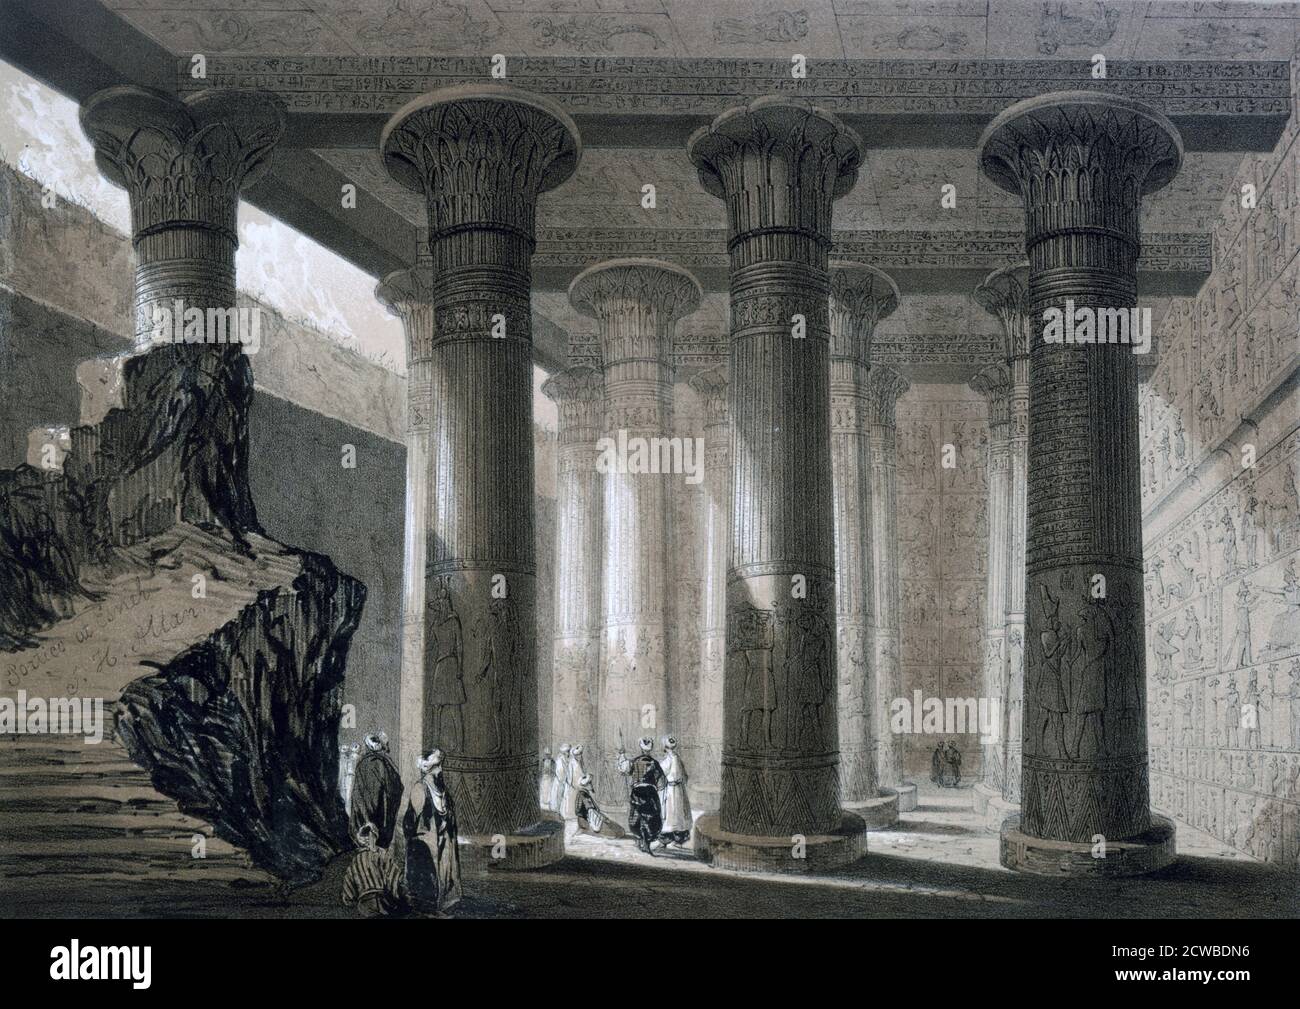 Temple at Esneh, Egypt', 19th century. Hypostyle hall inside the Temple of Khnum at Esna, built in the Ptolemaic period. By the British artist JH Allan. Stock Photo